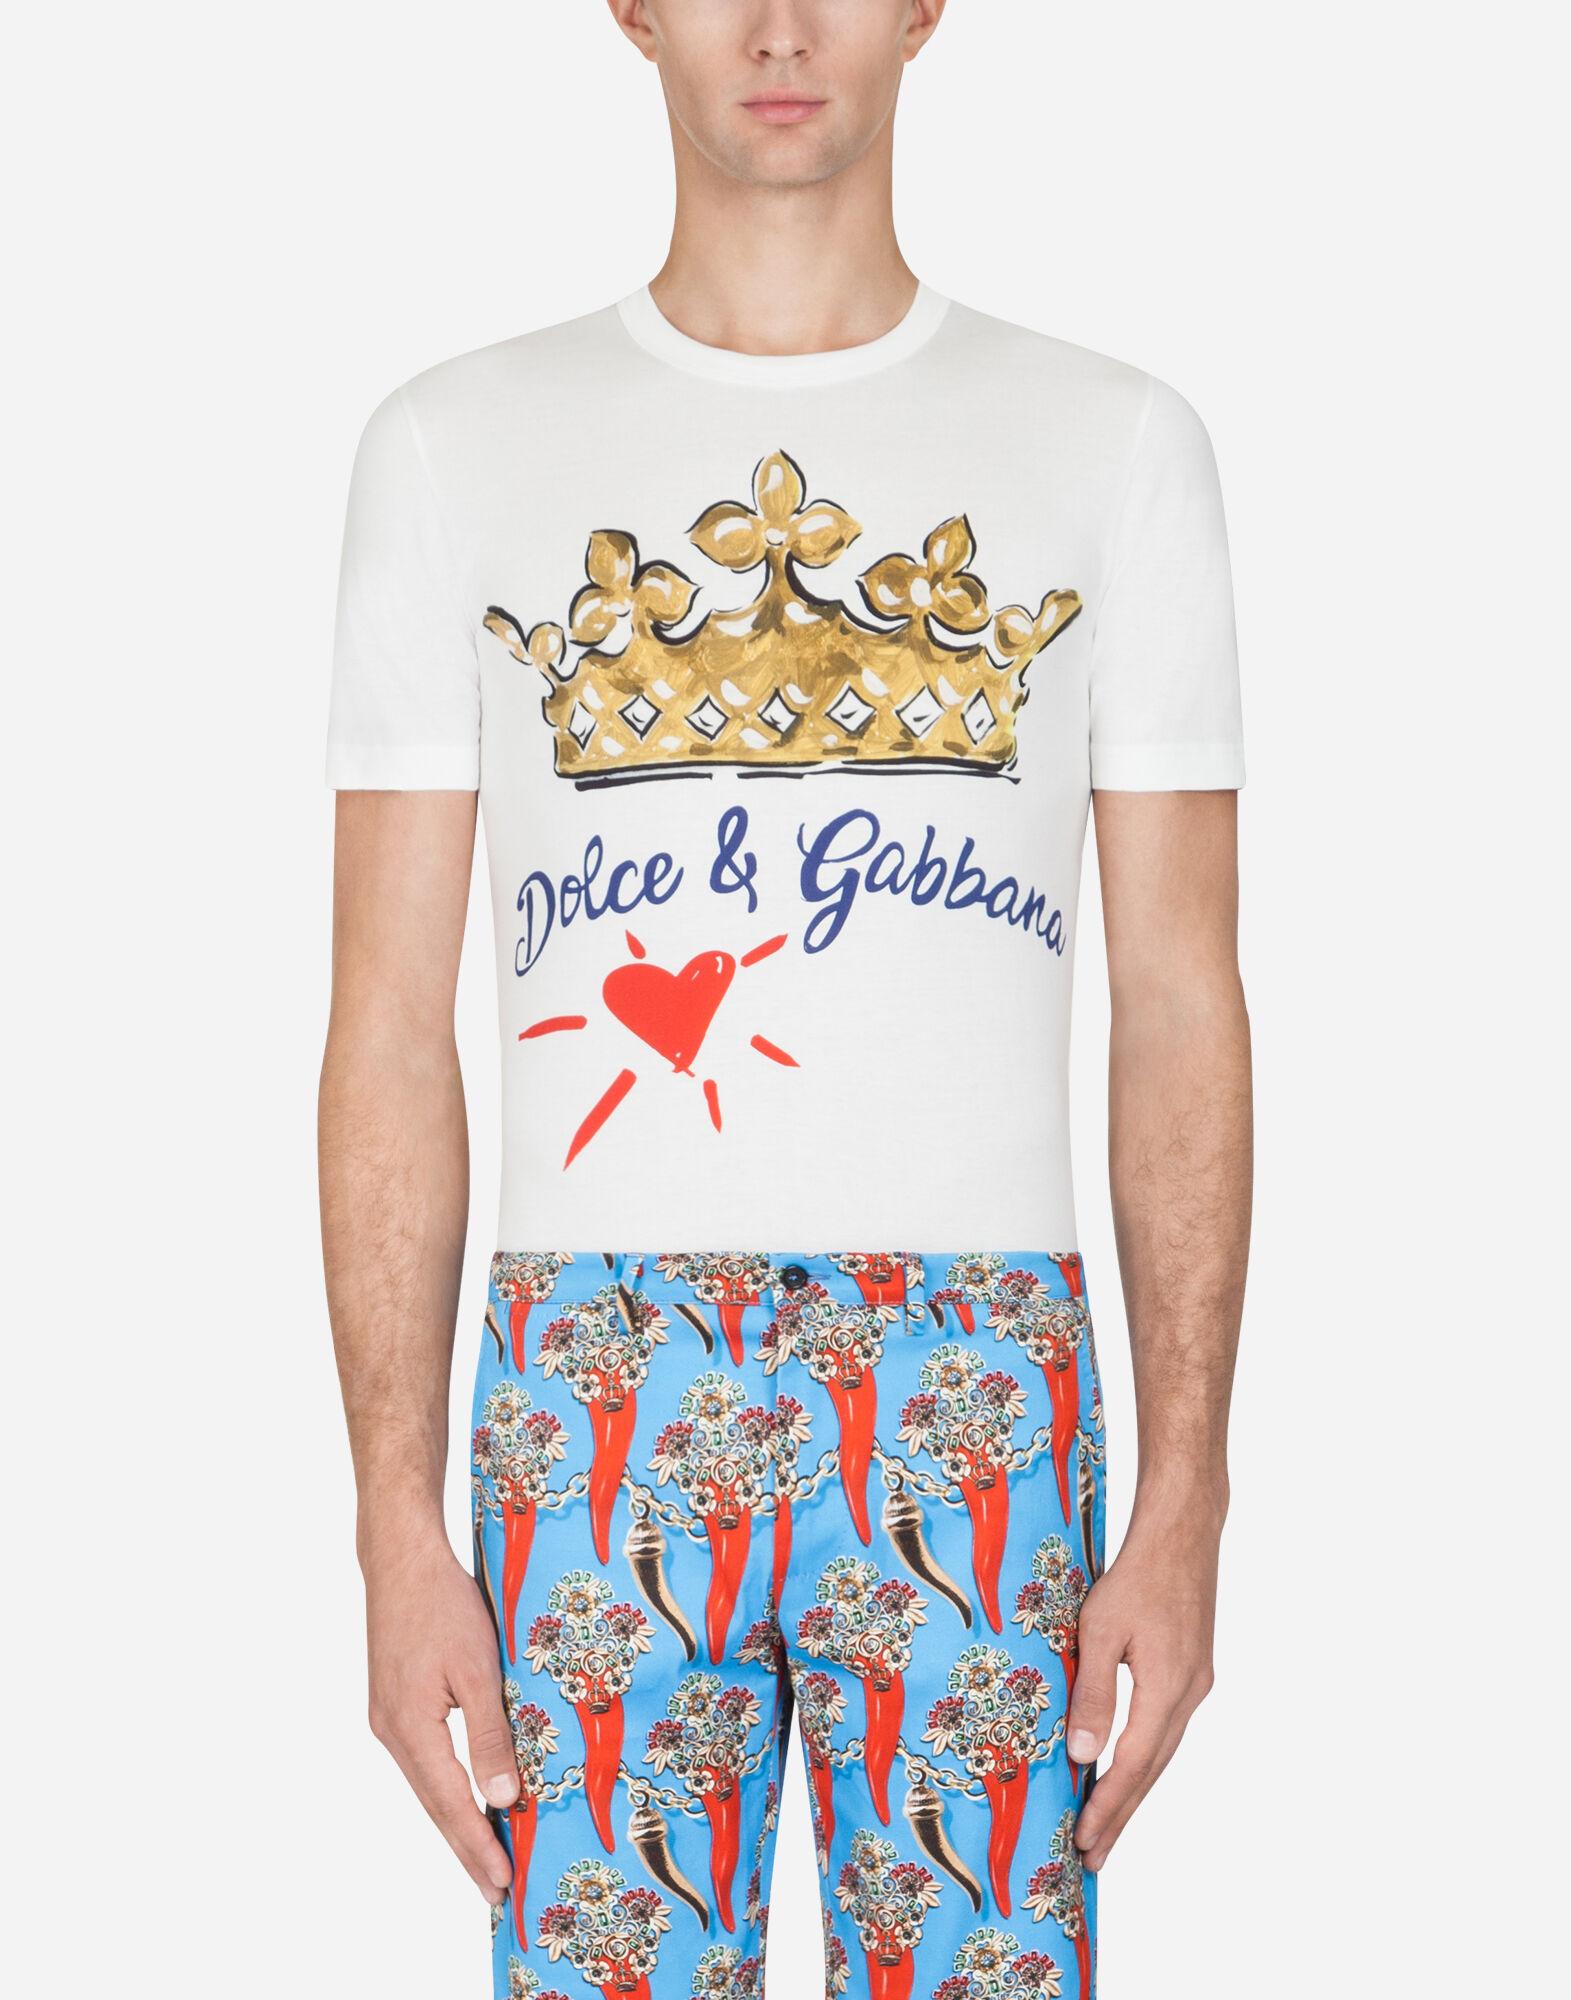 Dolce & Gabbana Cotton T-shirt With Print in White for Men - Lyst